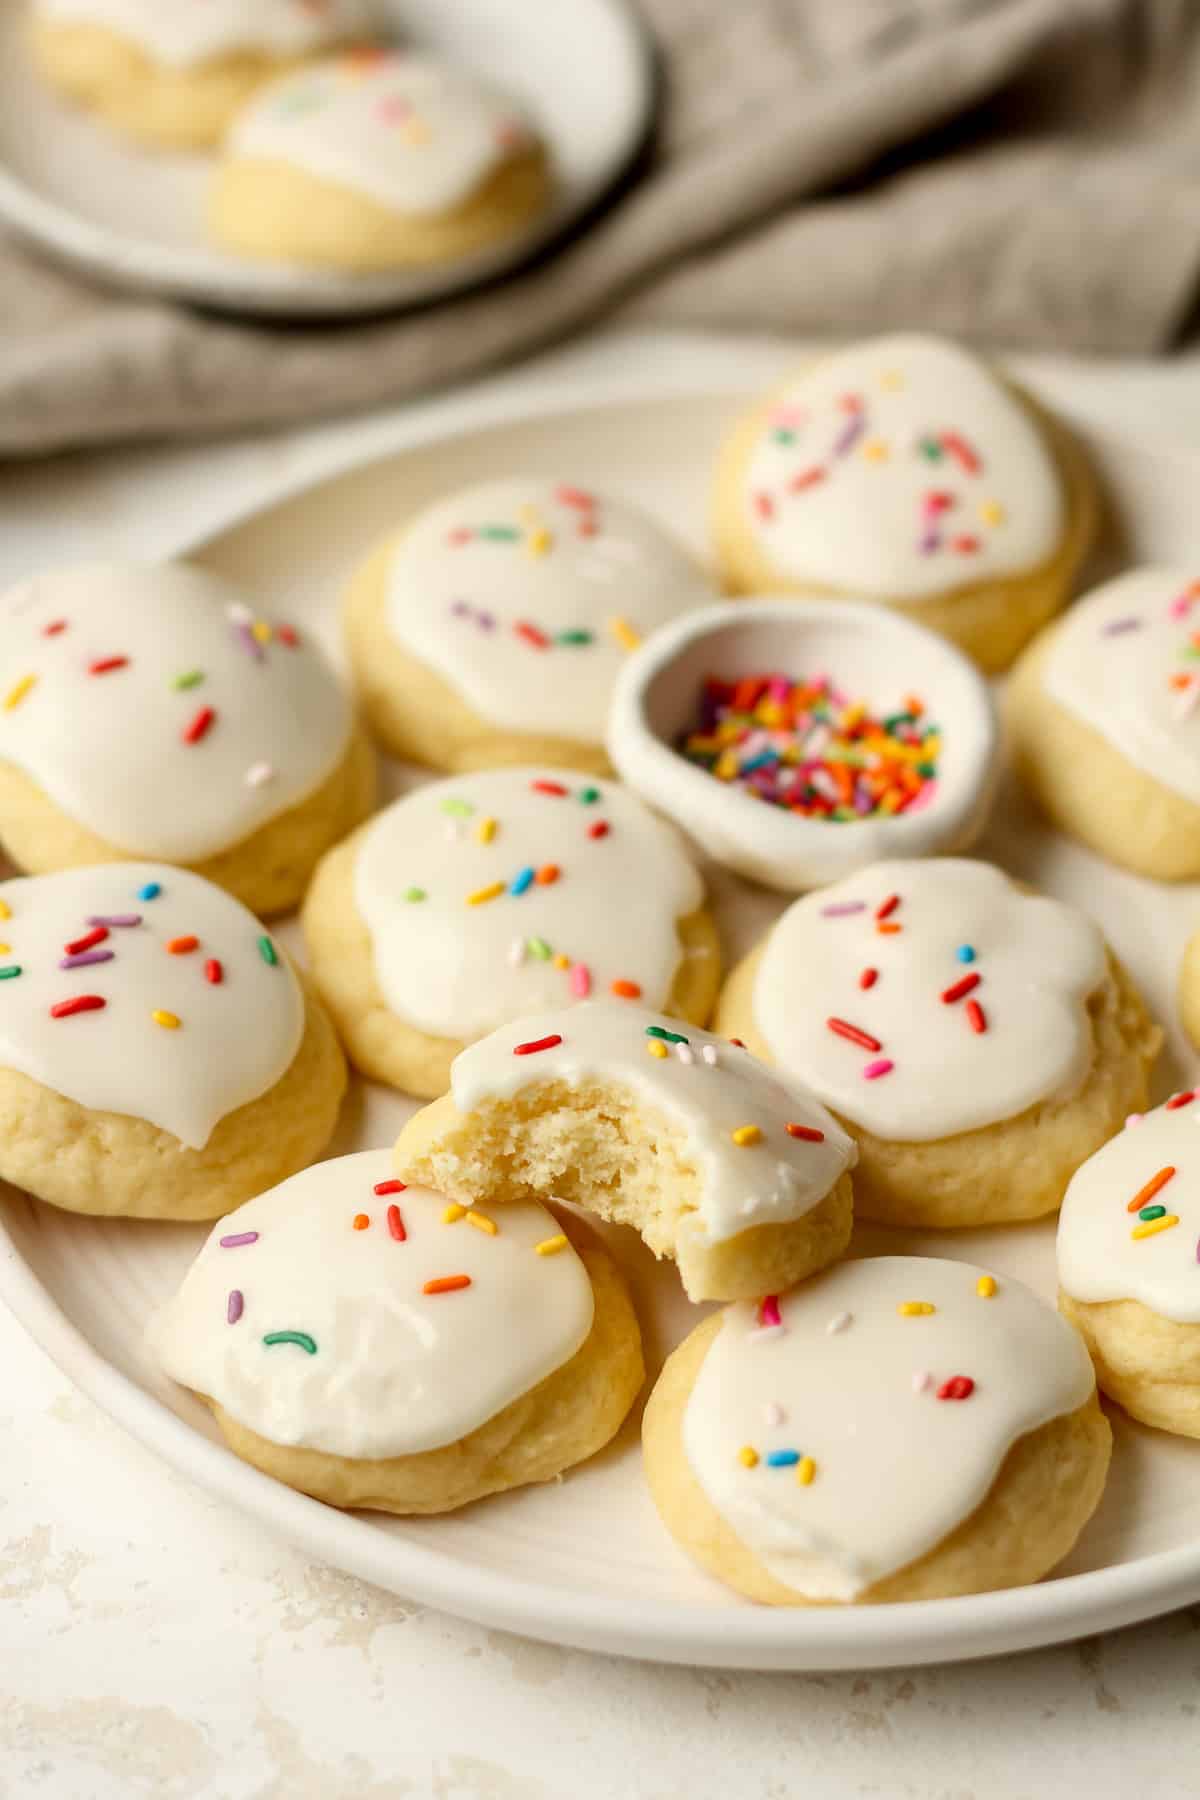 Side view of a large plate of lemon ricotta cookies, one with a bite out.